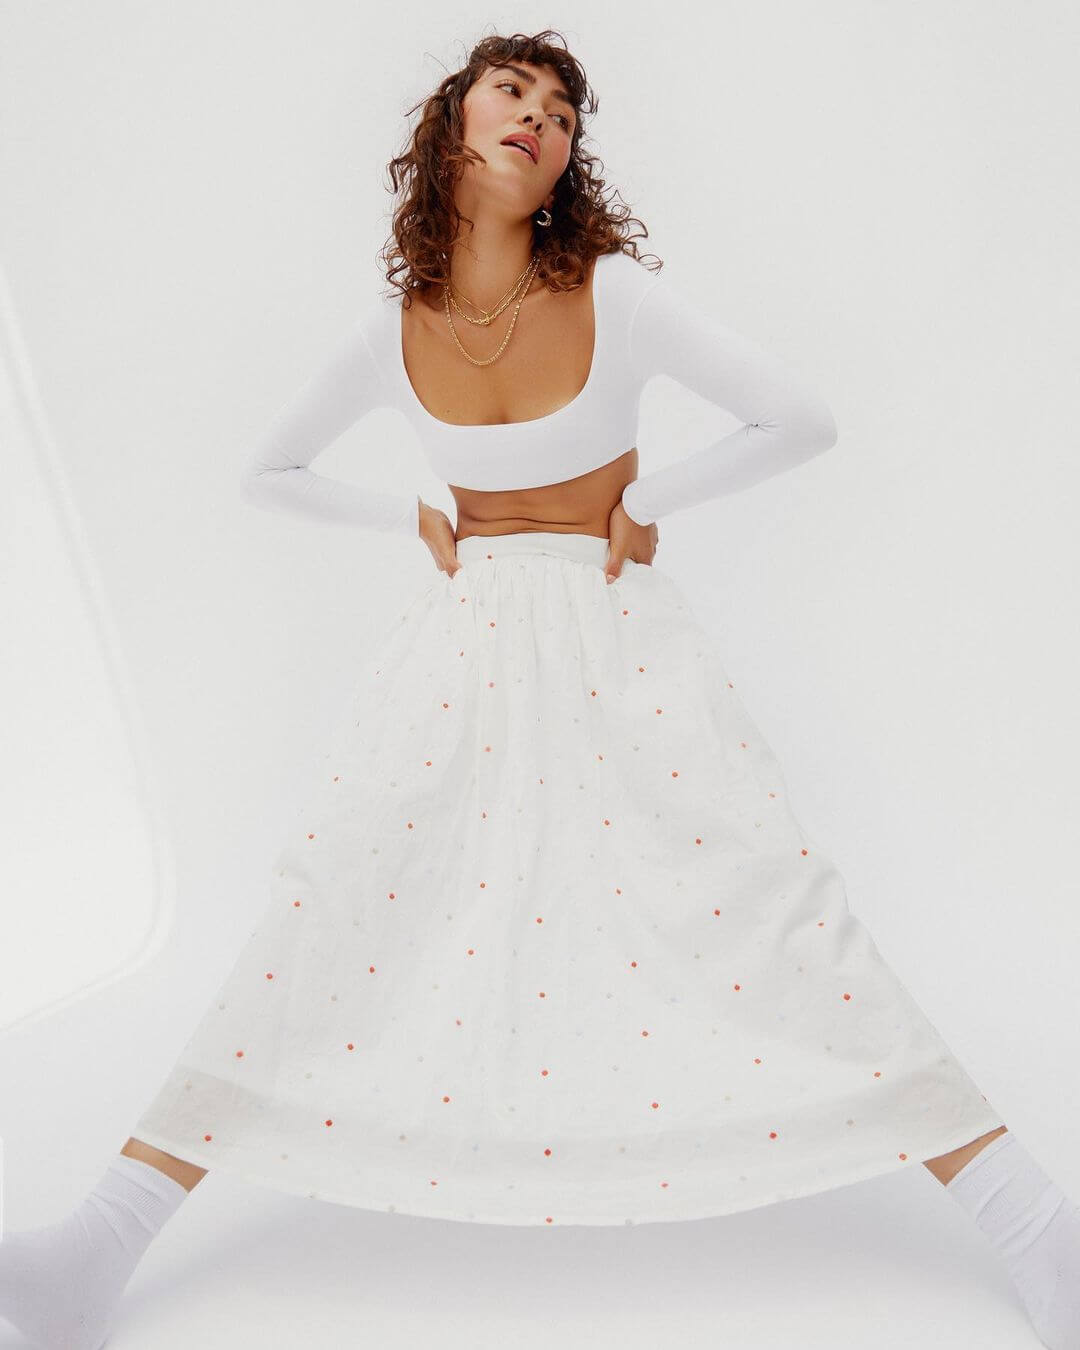 A Celestial Look: Sydney Schafer's Enchanting White Dress with Red Polka Dots